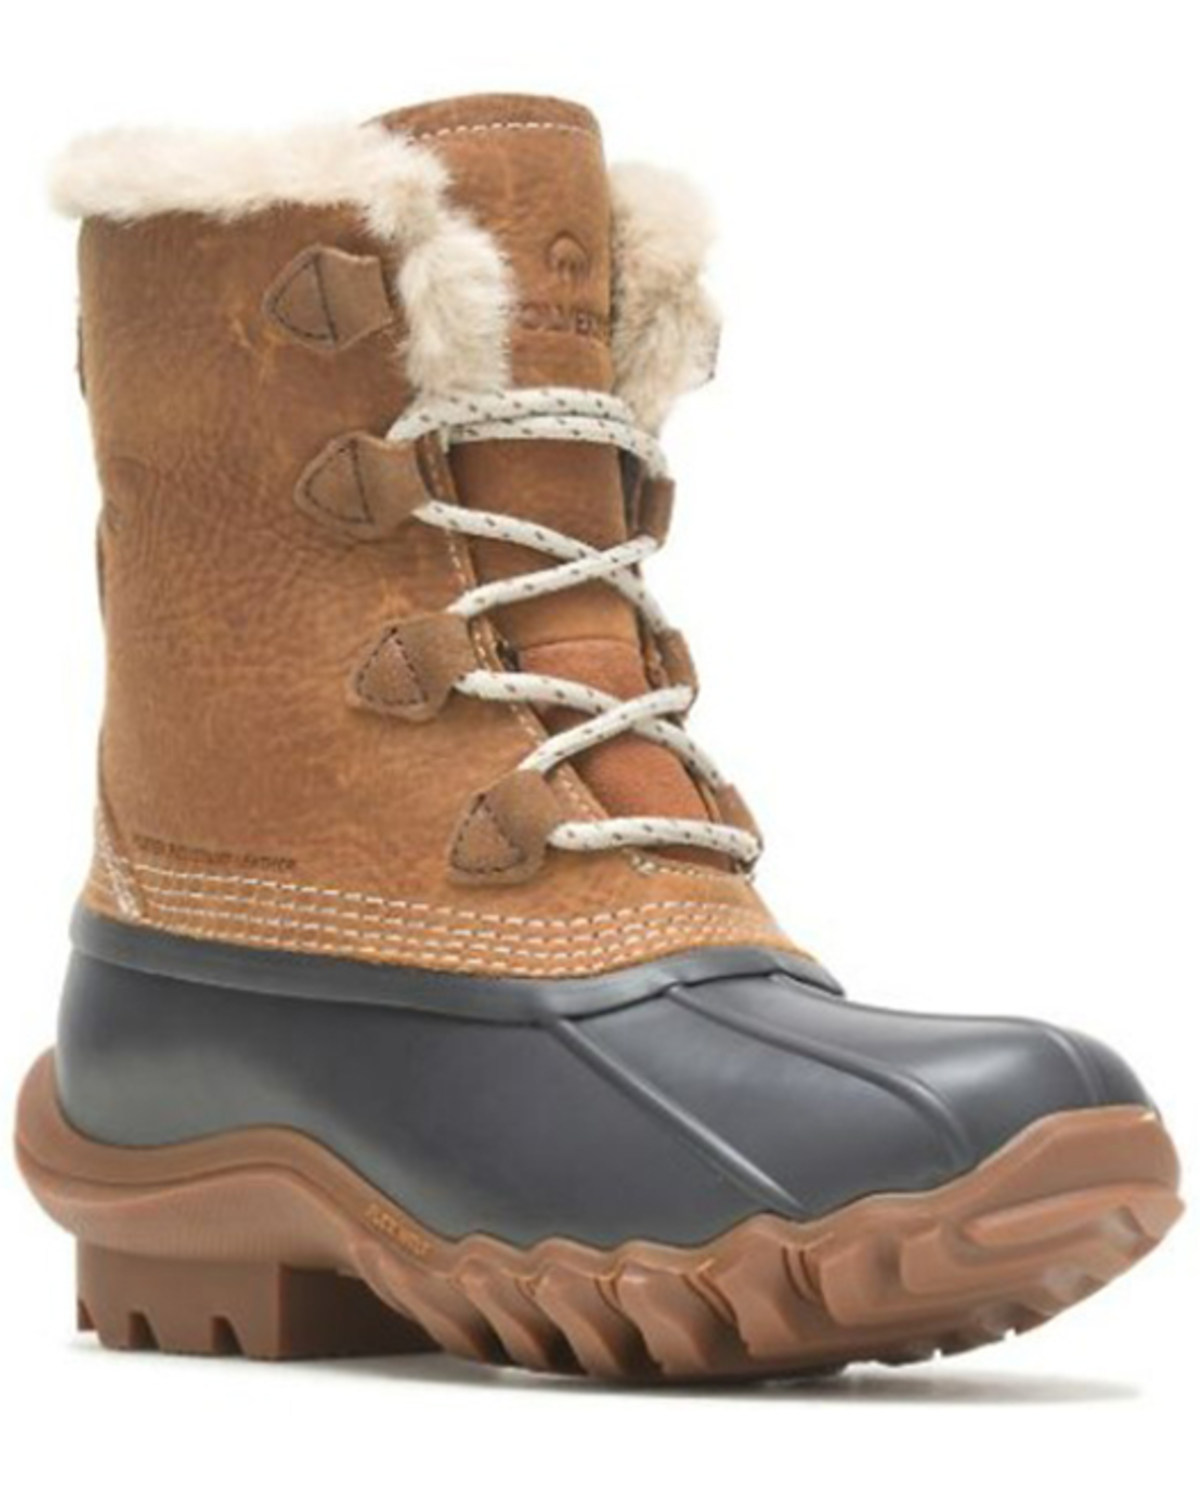 Wolverine Women's Torrent Faux-Fur Tall Duck Boots- Round Toe